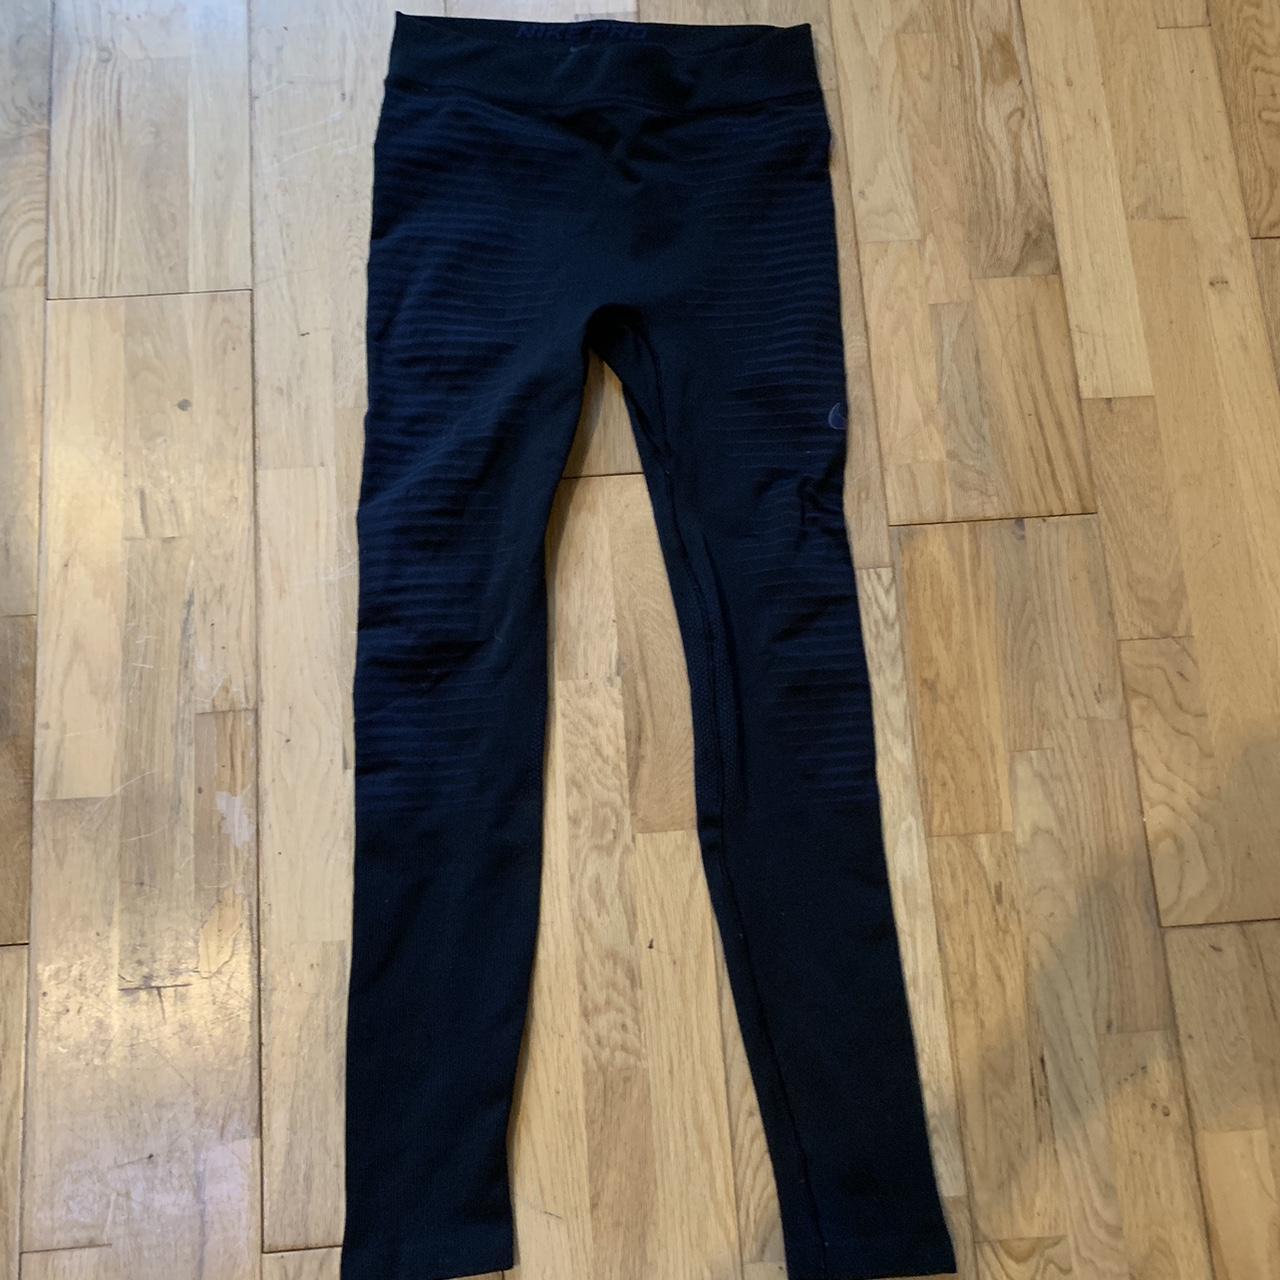 Nike pro striped navy and black leggings in a size... - Depop